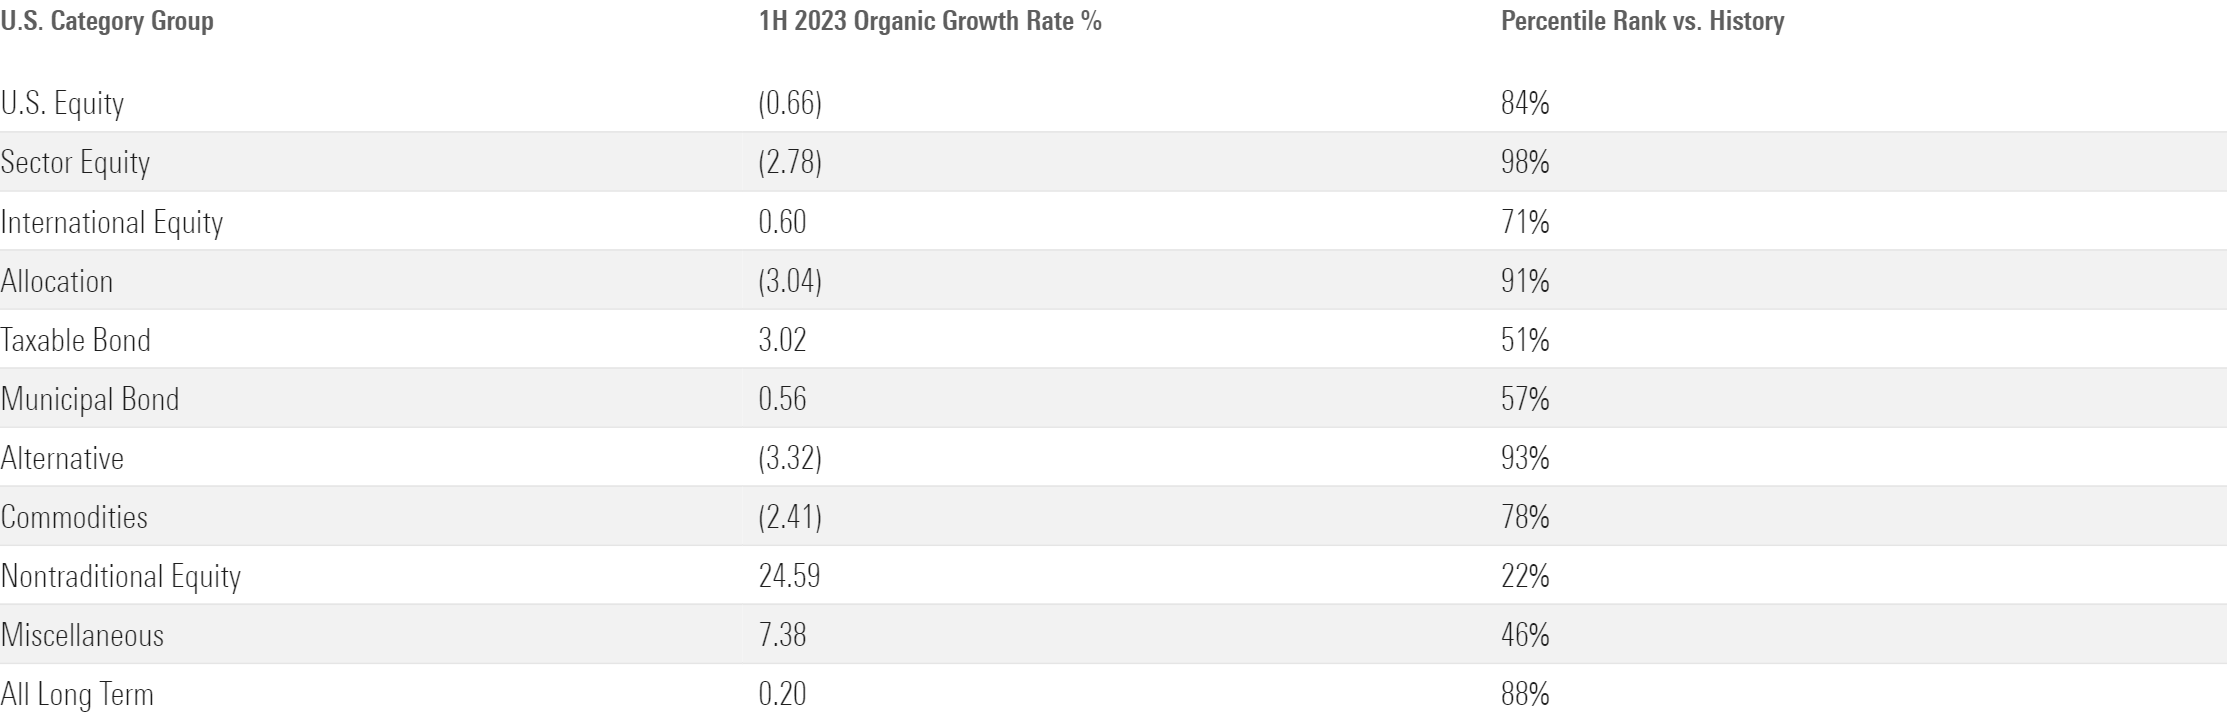 Table of organic growth rates by category group.